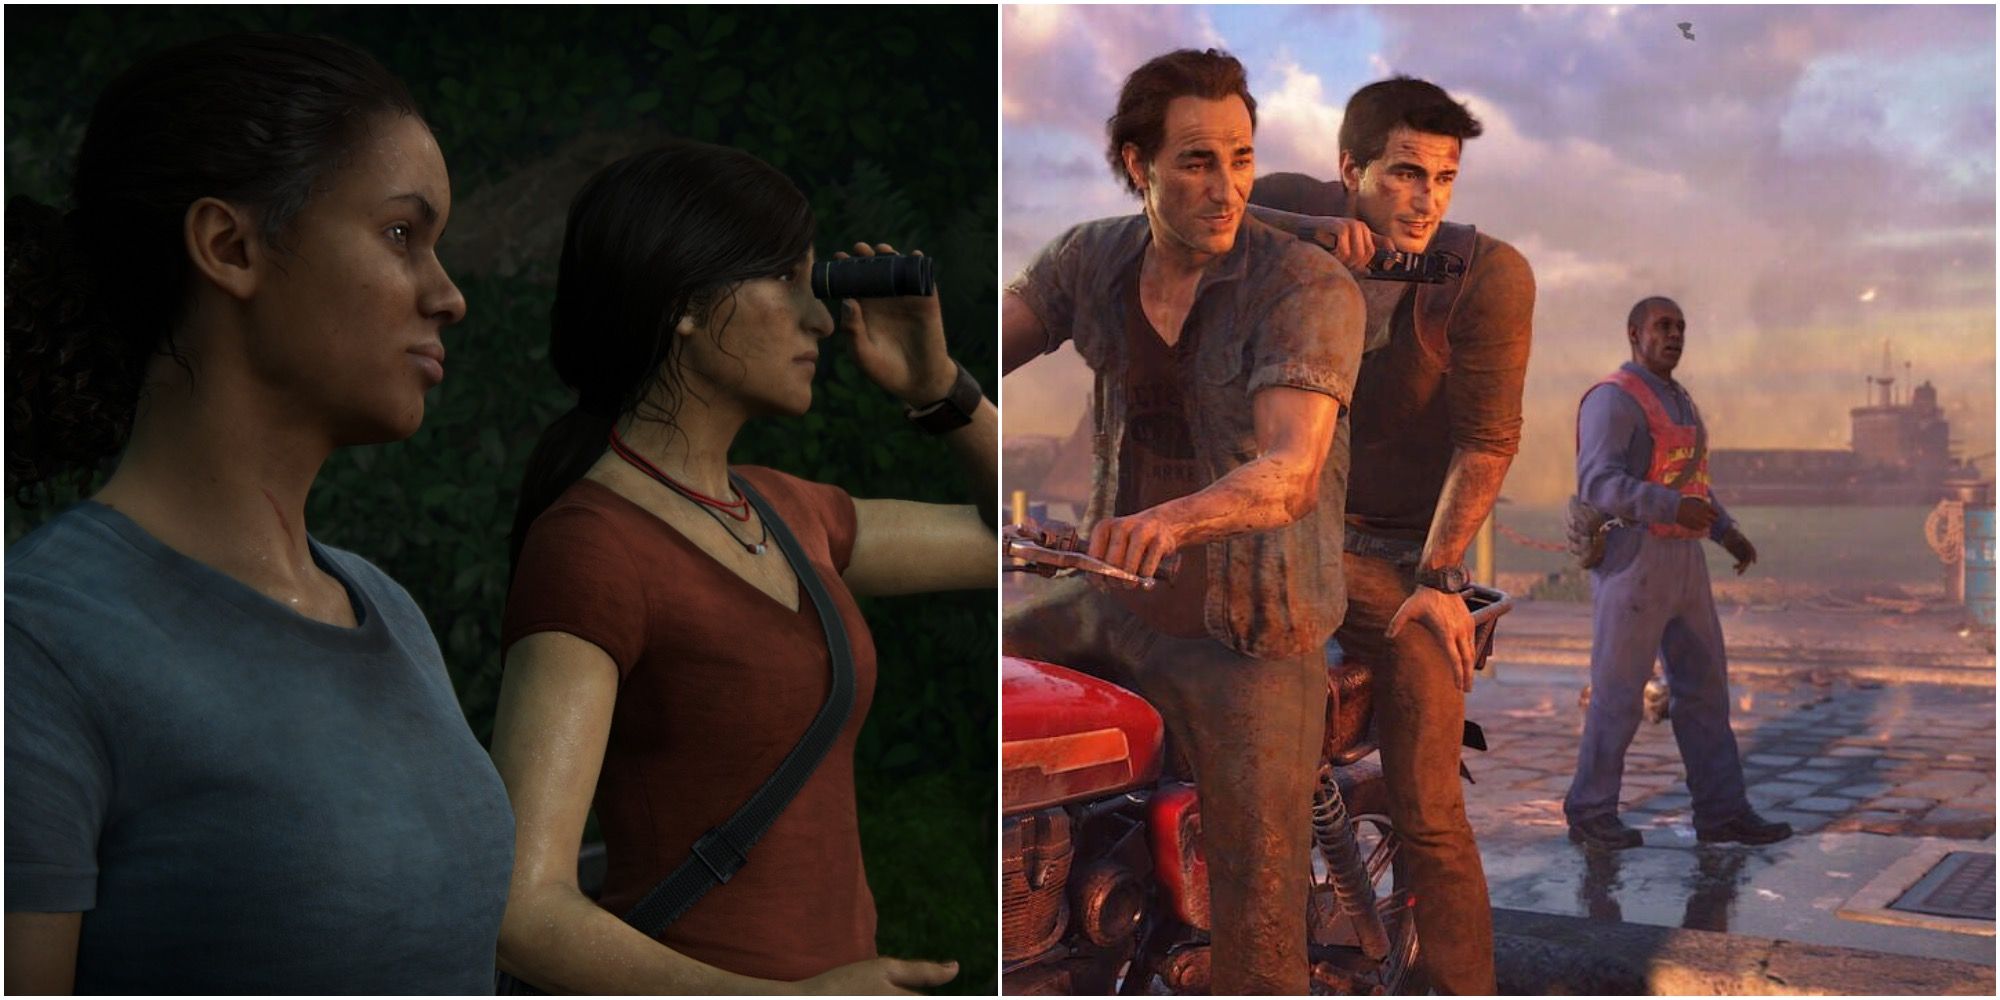 Uncharted 4 and Uncharted: The Lost Legacy are Being Remastered